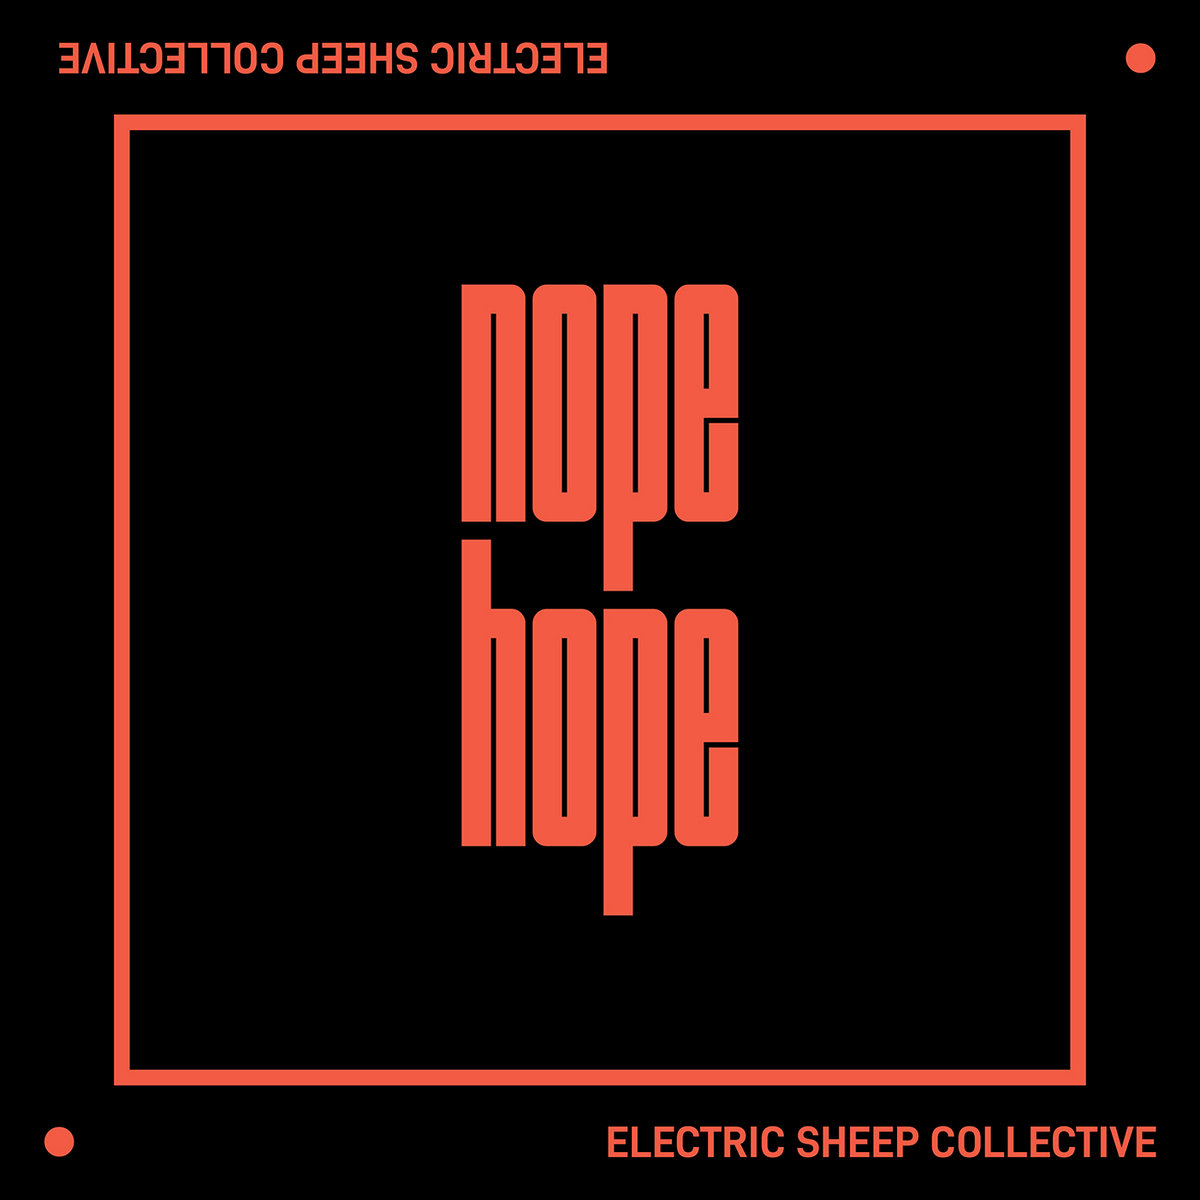 Electric Sheep Collective - Nope-Hope